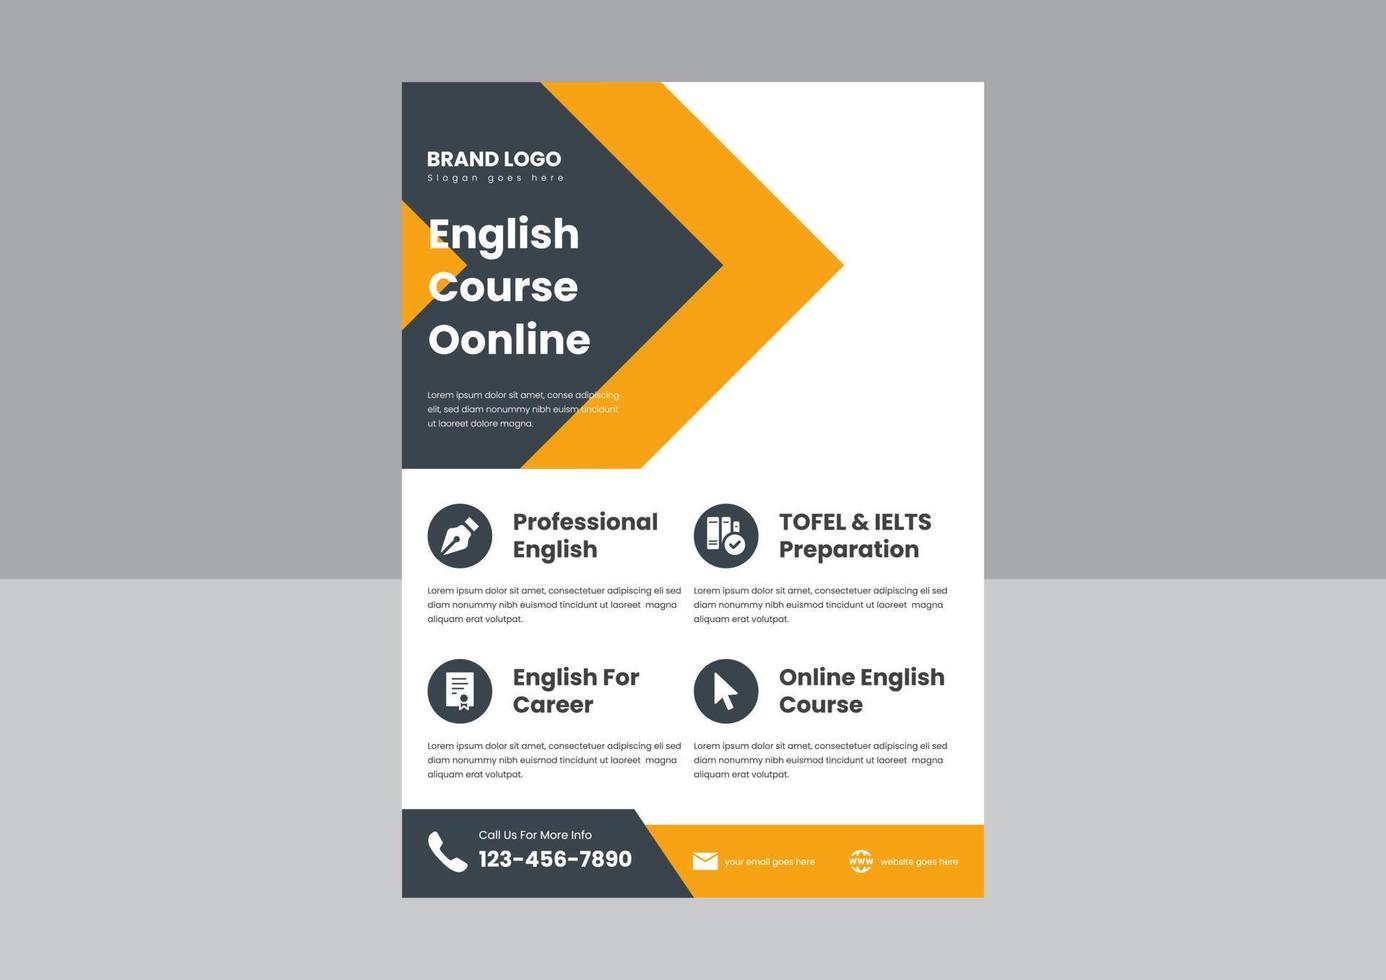 learn English online flyer design. English language course flyer design. best English language course poster flyer. vector